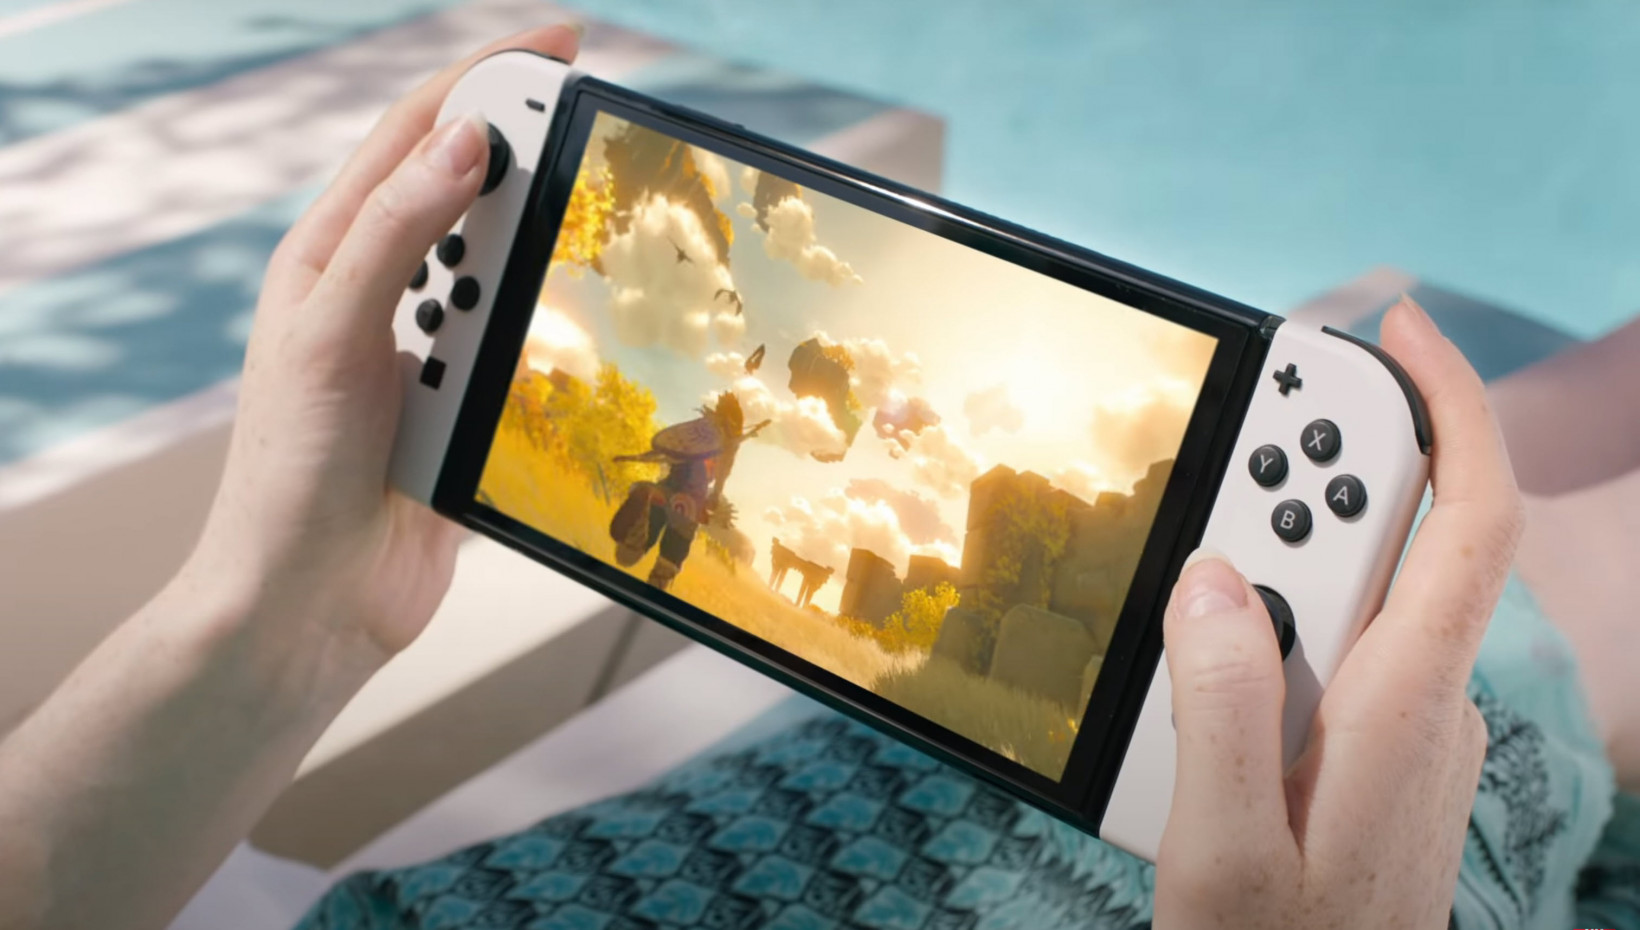 The Nintendo Switch OLED is nice, but I want a Switch Pro for Zelda